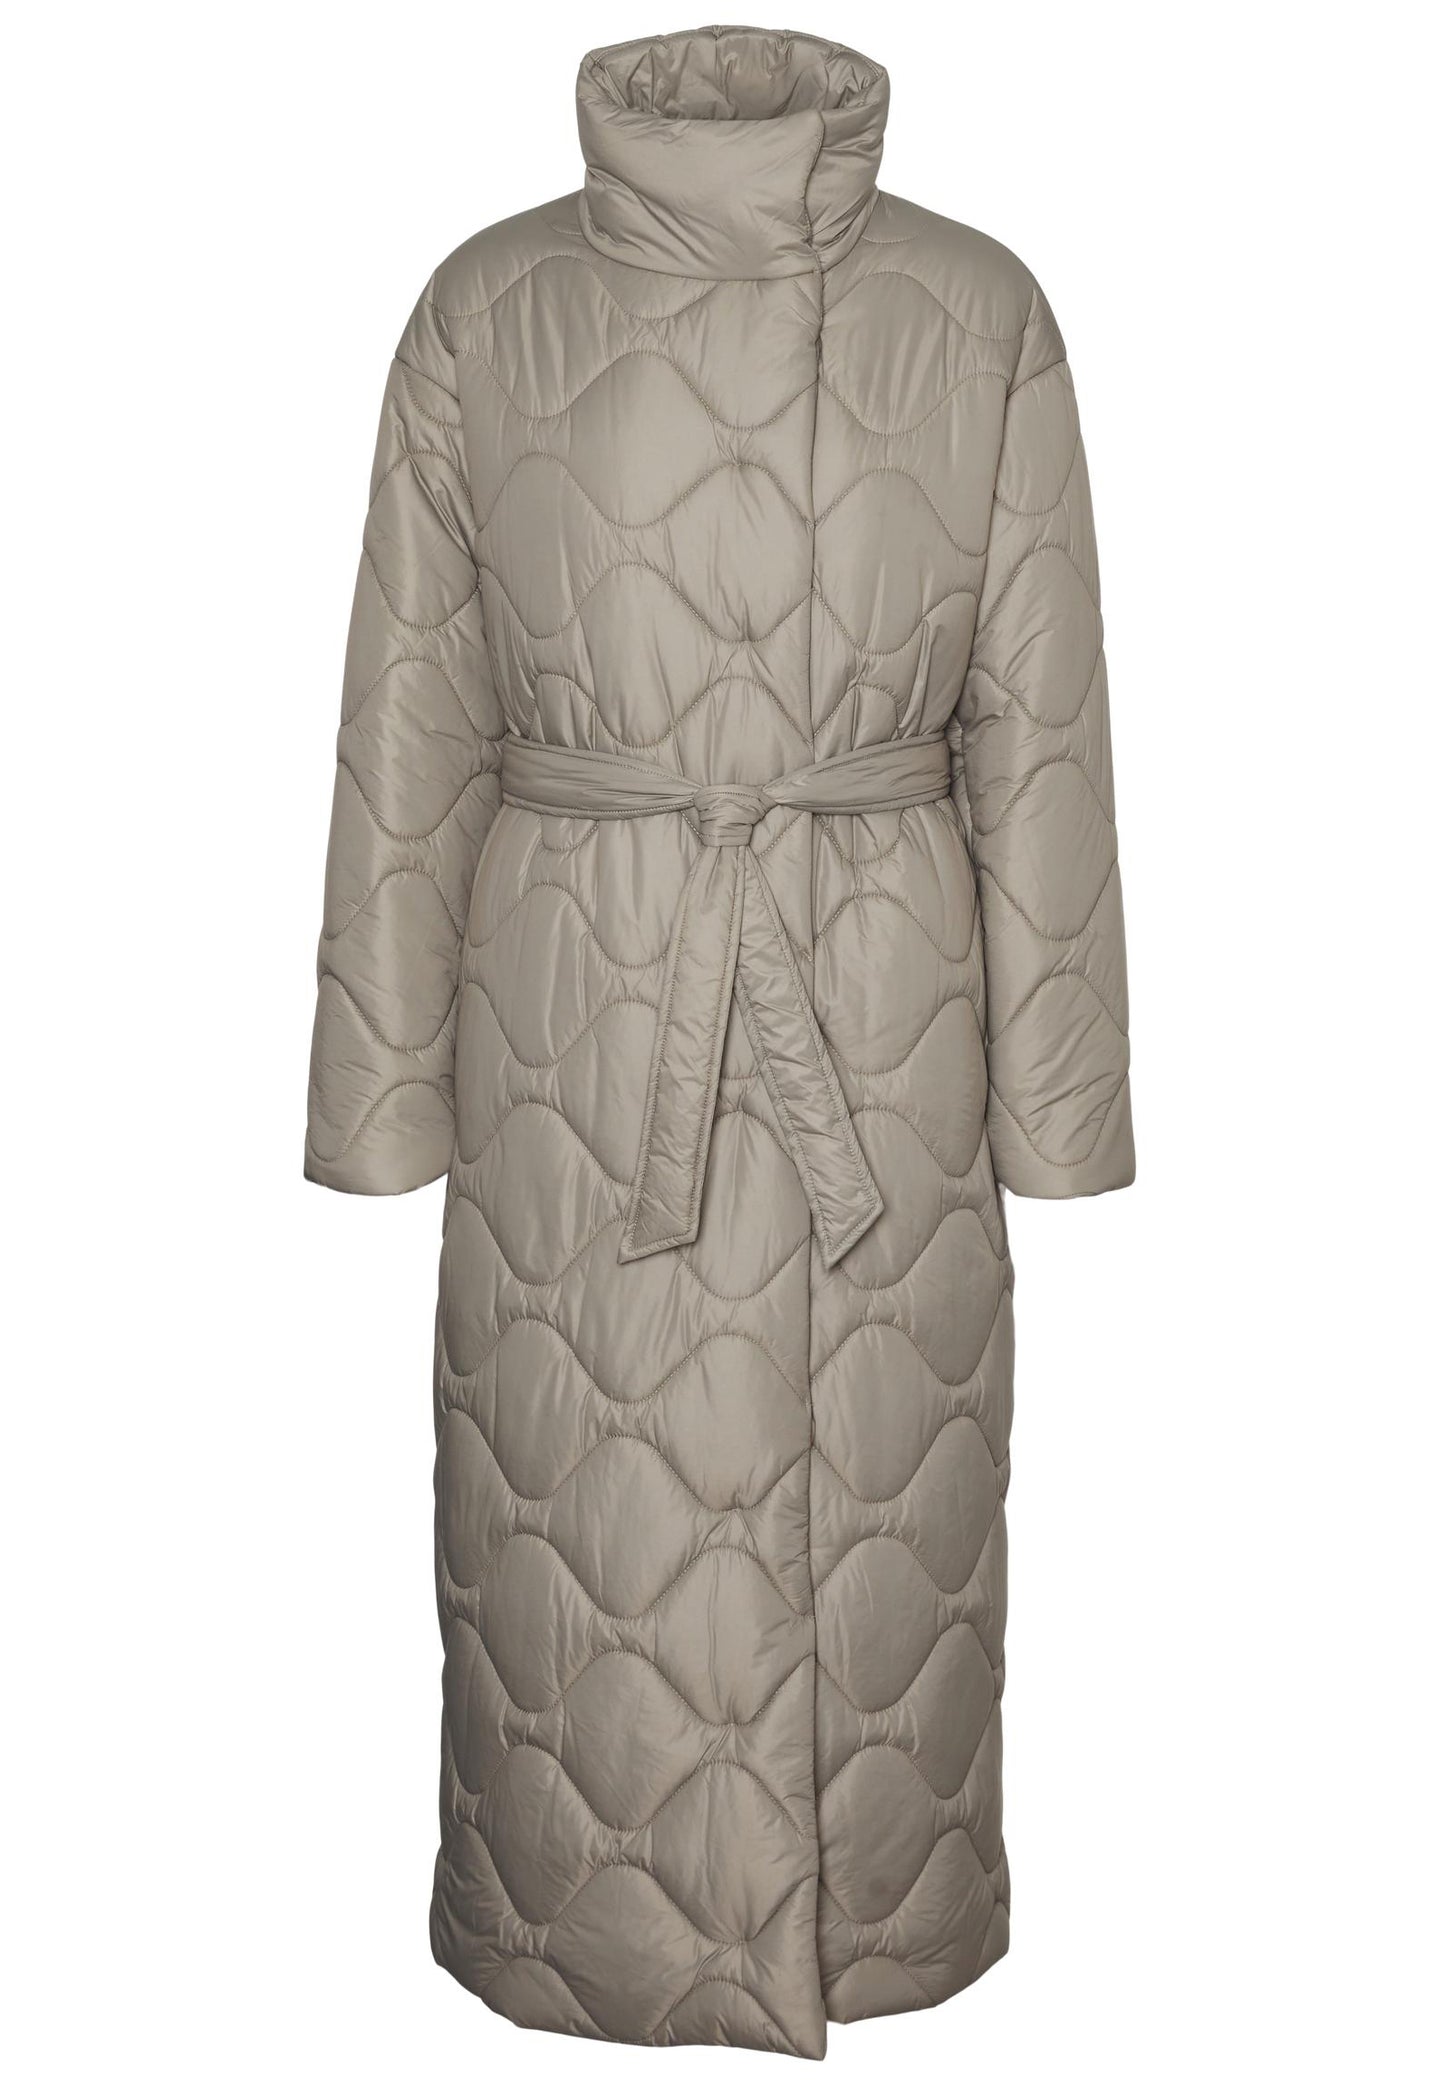 
                  
                    VERO MODA Astoria Onion Quilted Midi Jacket with High Neck & Belt in Soft Khaki - One Nation Clothing
                  
                